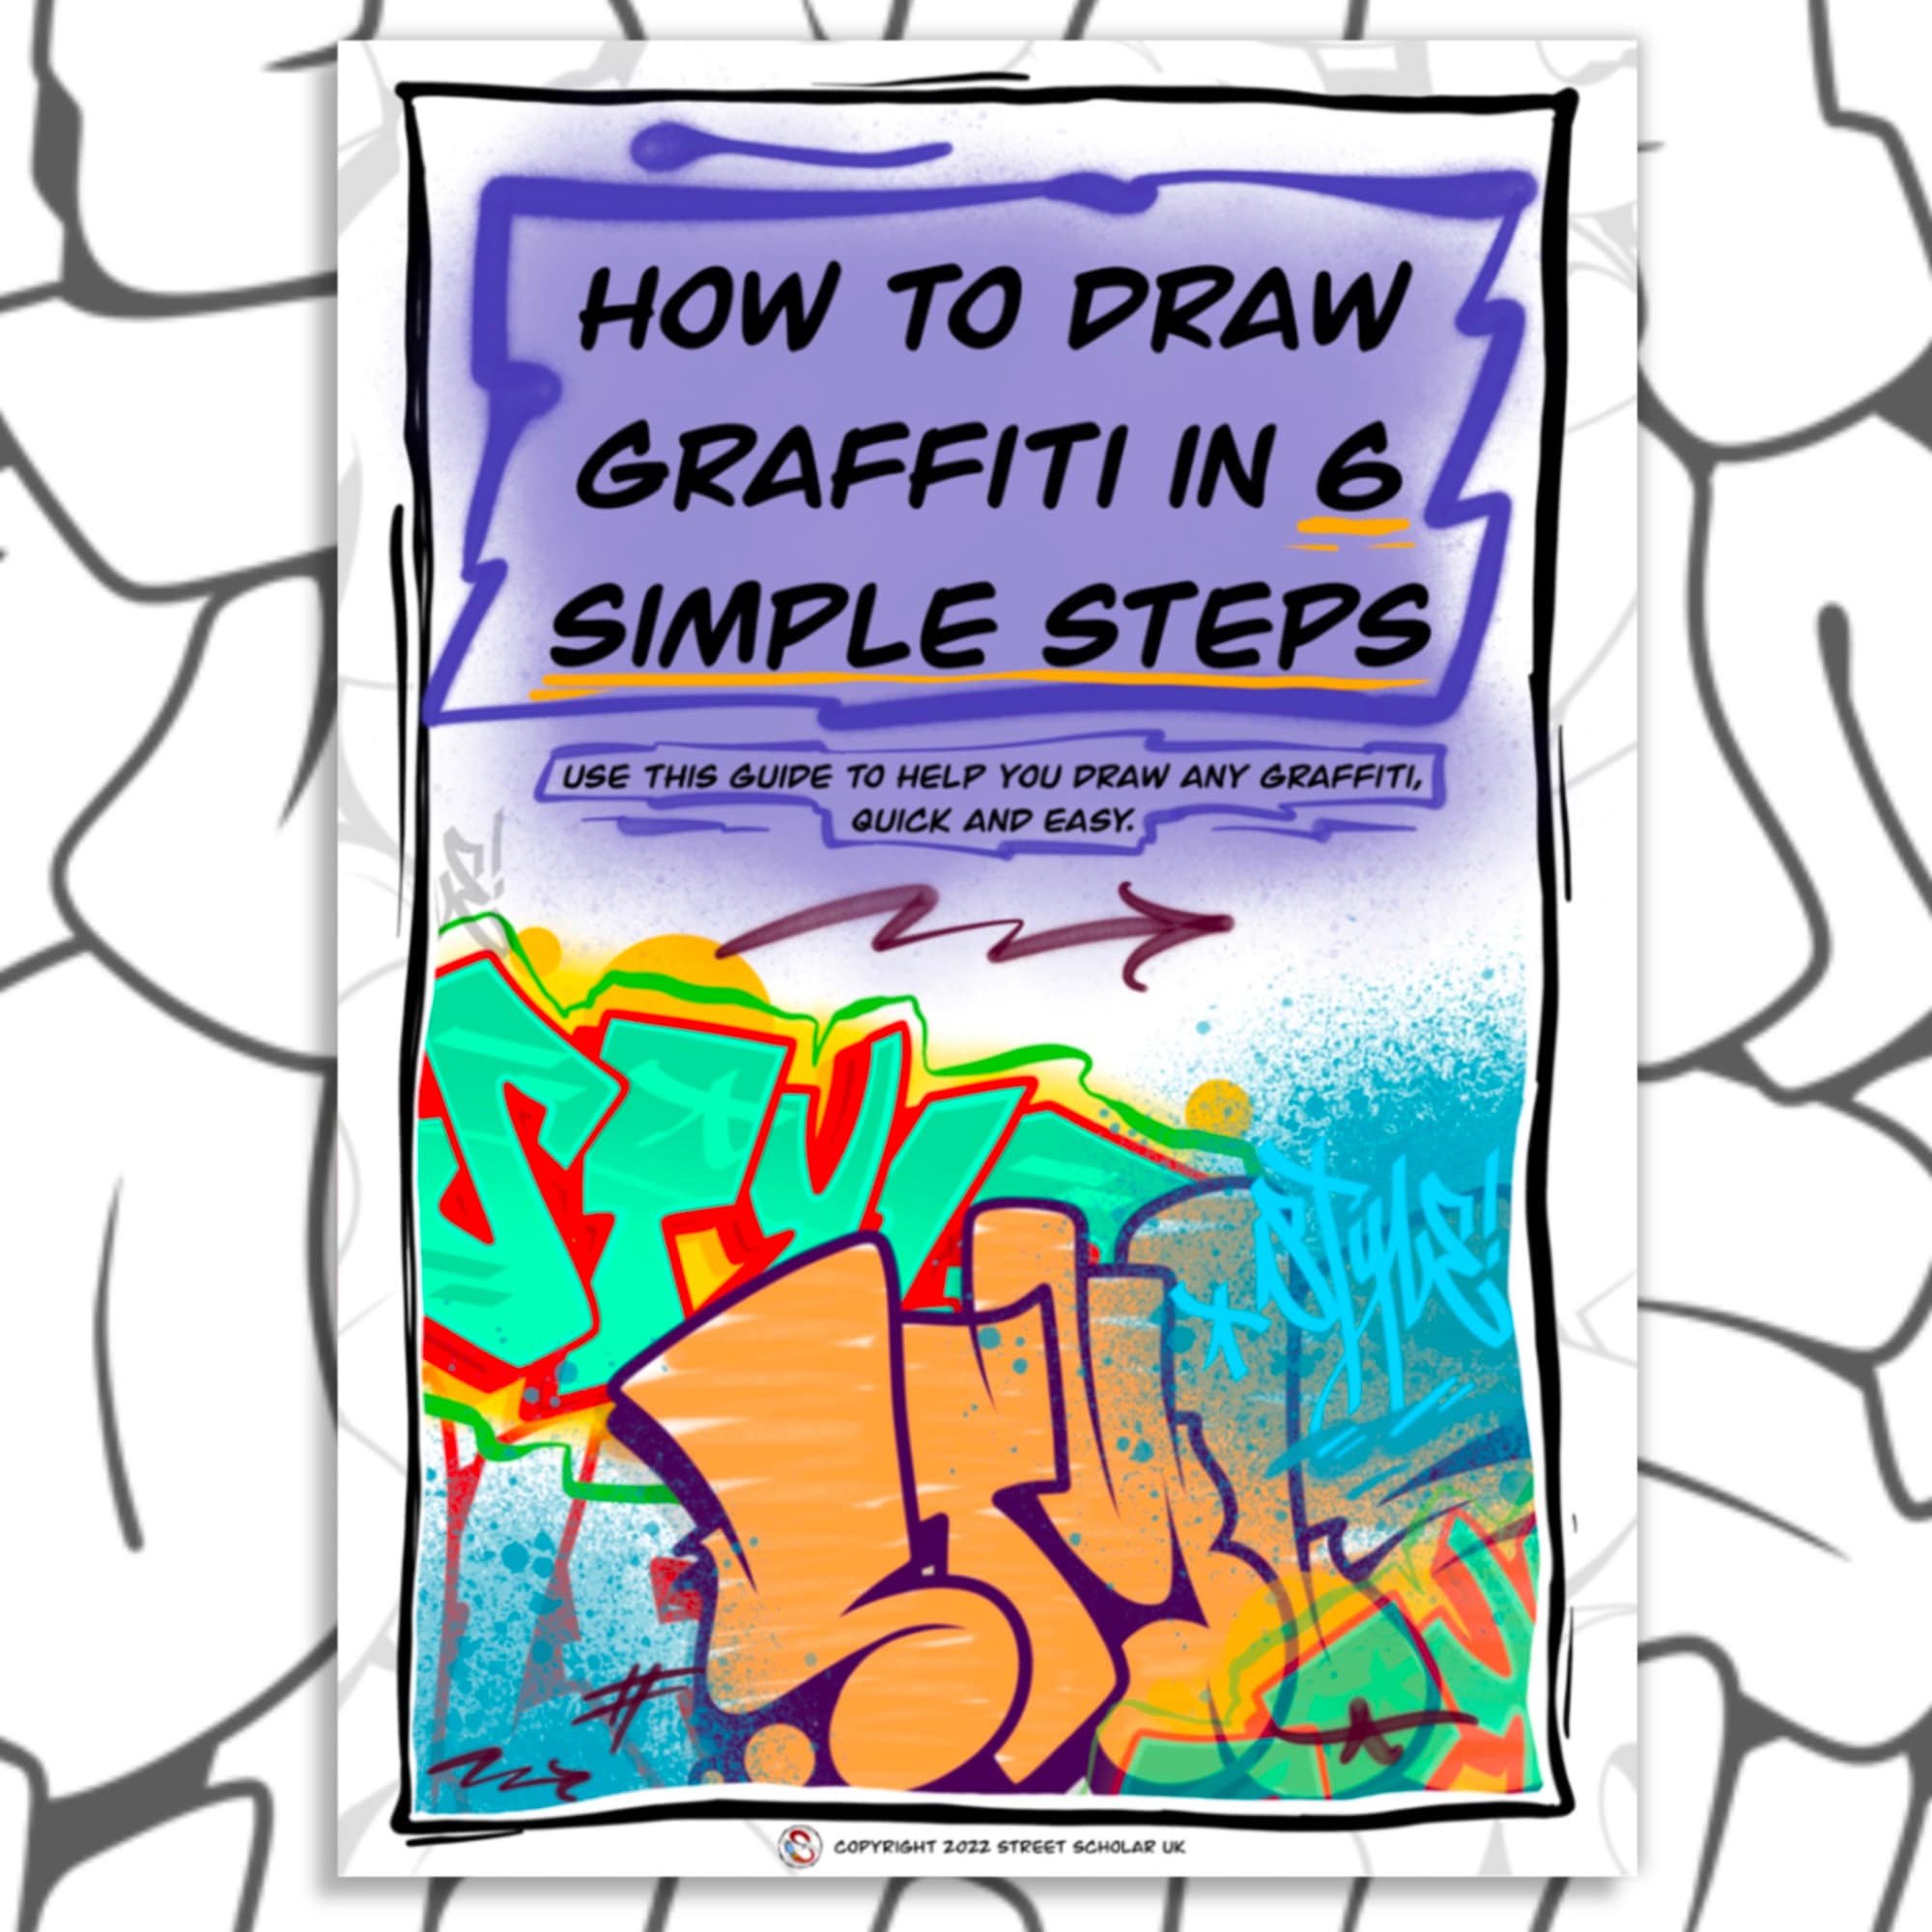 A step by step guide on how to draw graffiti for beginners